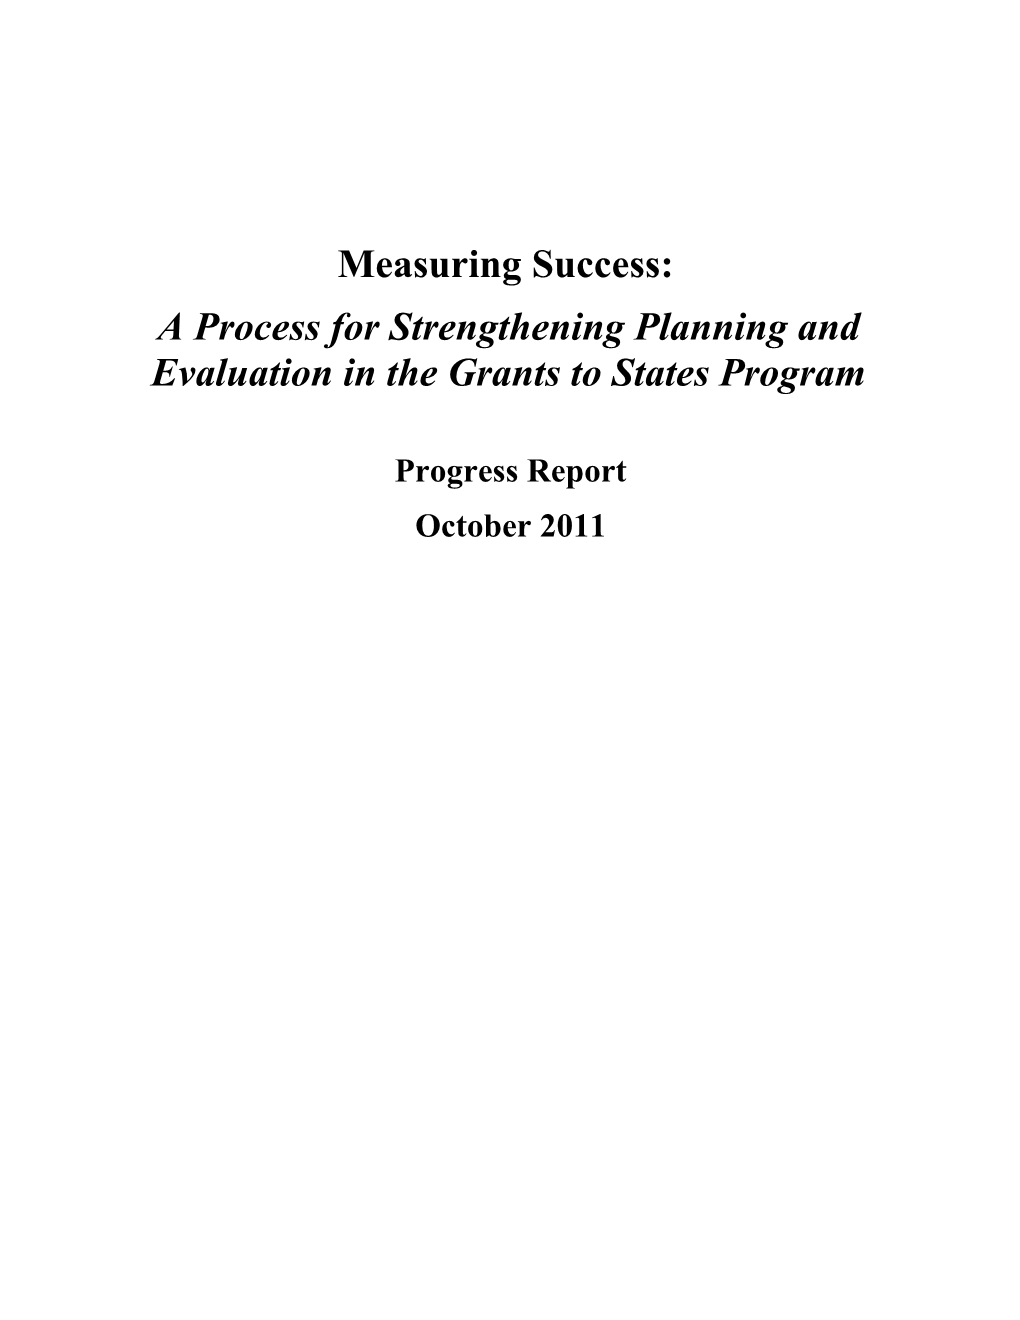 A Process for Strengthening Planning and Evaluation in the Grants to States Program